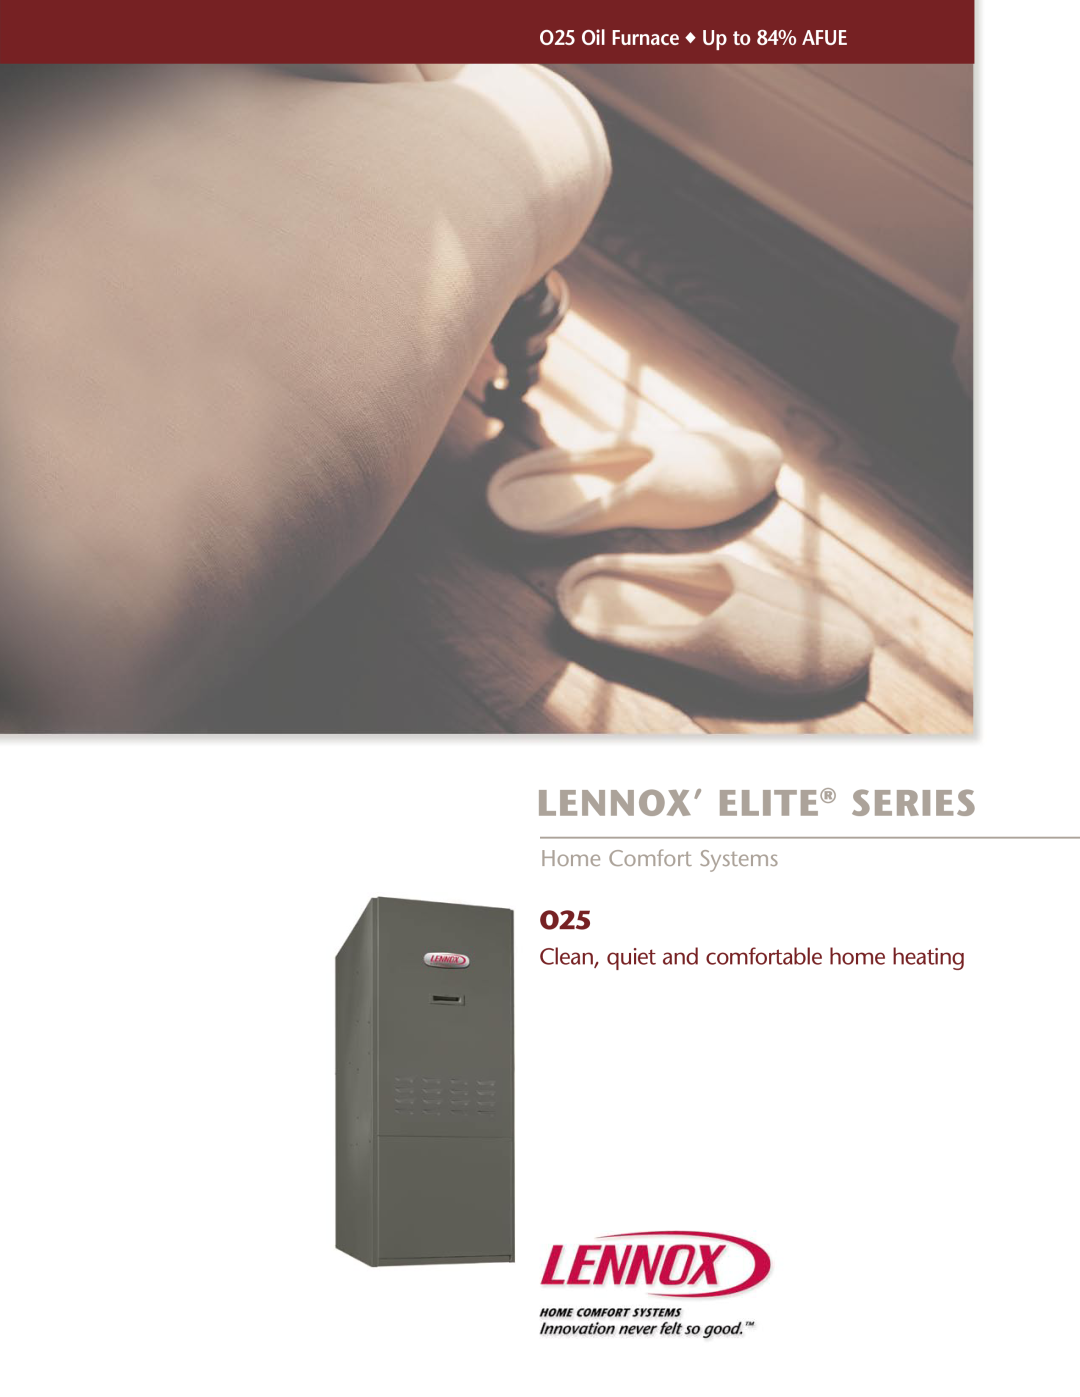 Lenoxx Electronics O25 manual Lennox’ Elite Series, Home Comfort Systems, Clean, quiet and comfortable home heating 